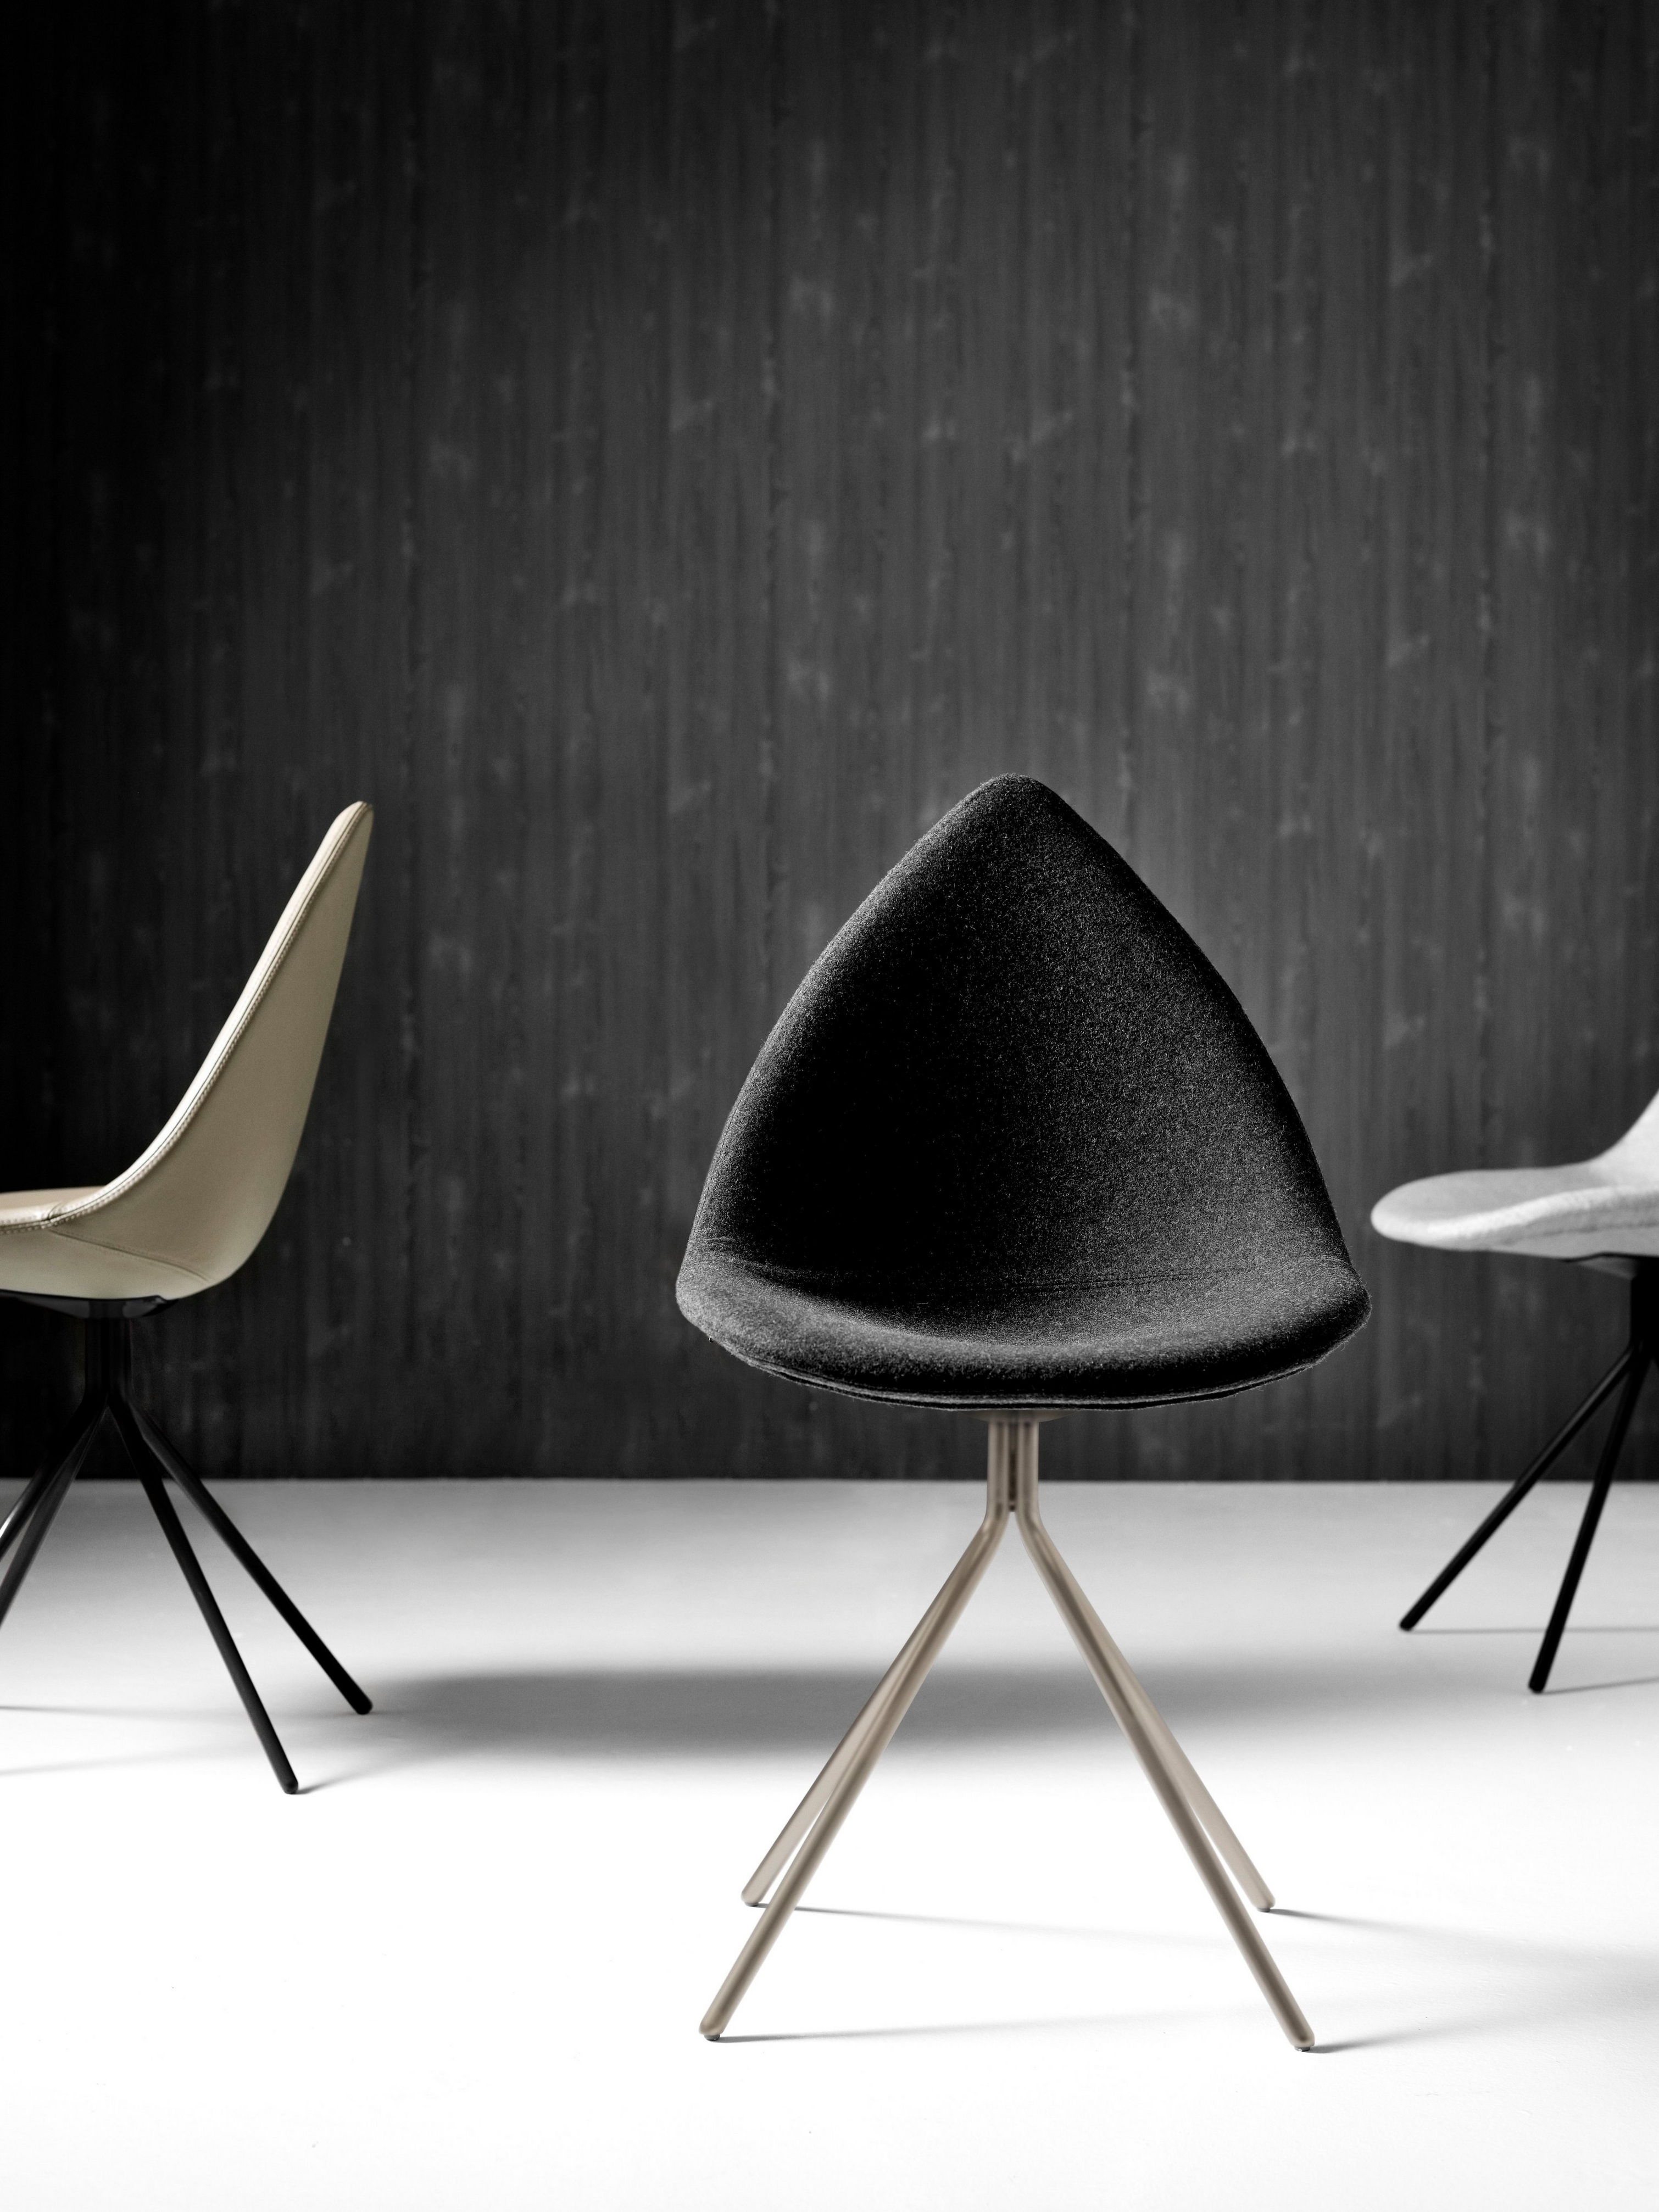 Modern Ottawa chairs in a monochrome setting with a textured black backdrop.